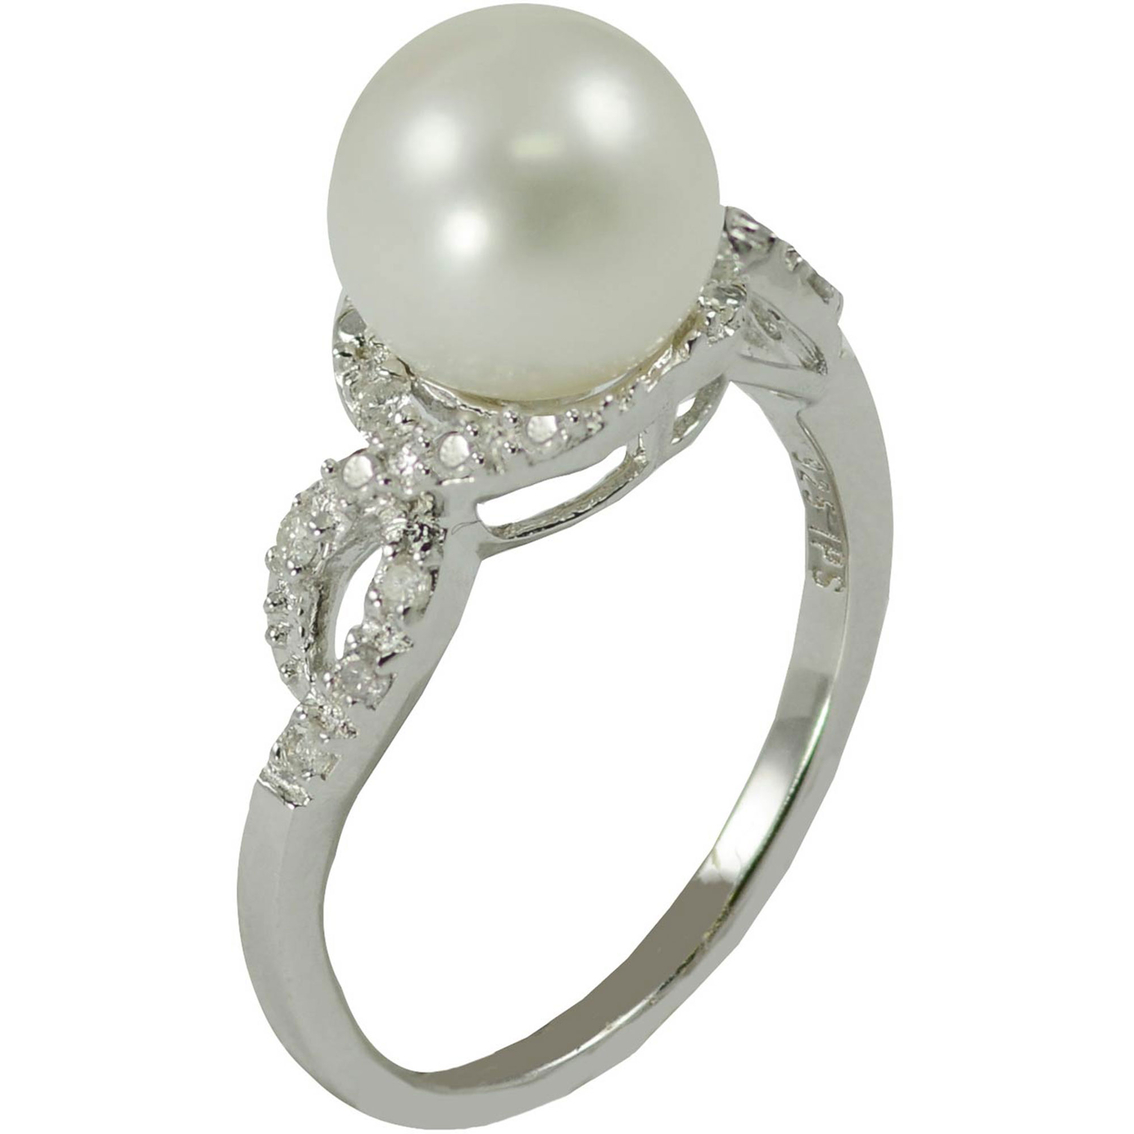 Sterling Silver And Rhodium 5-9mm Cultured Freshwater Pearl Ring With ...